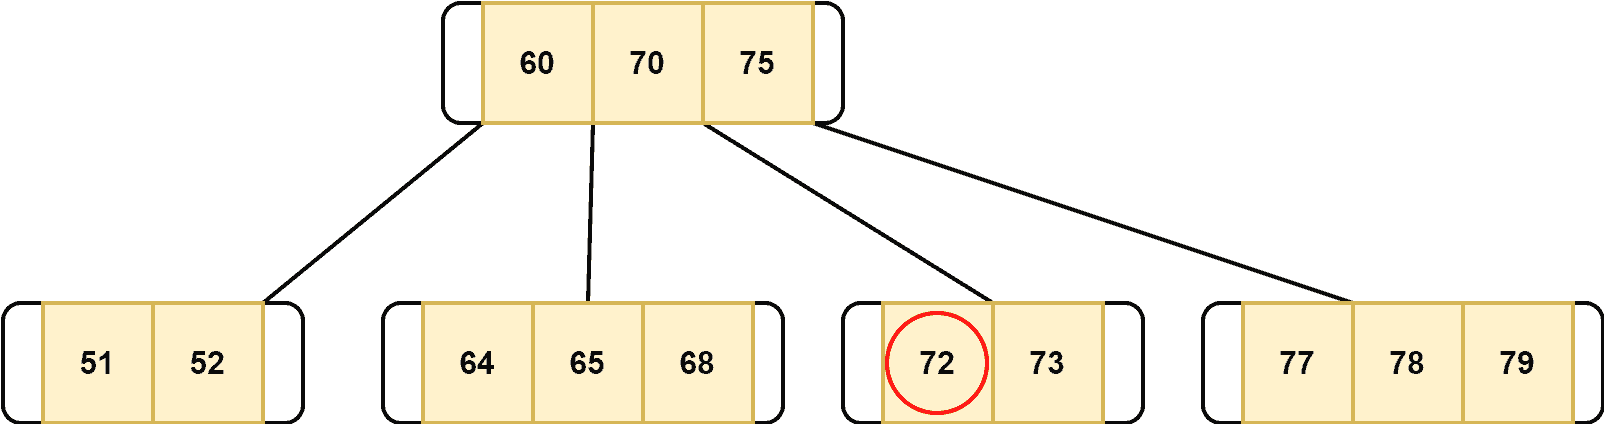 Deletion of the key 72 from B-tree